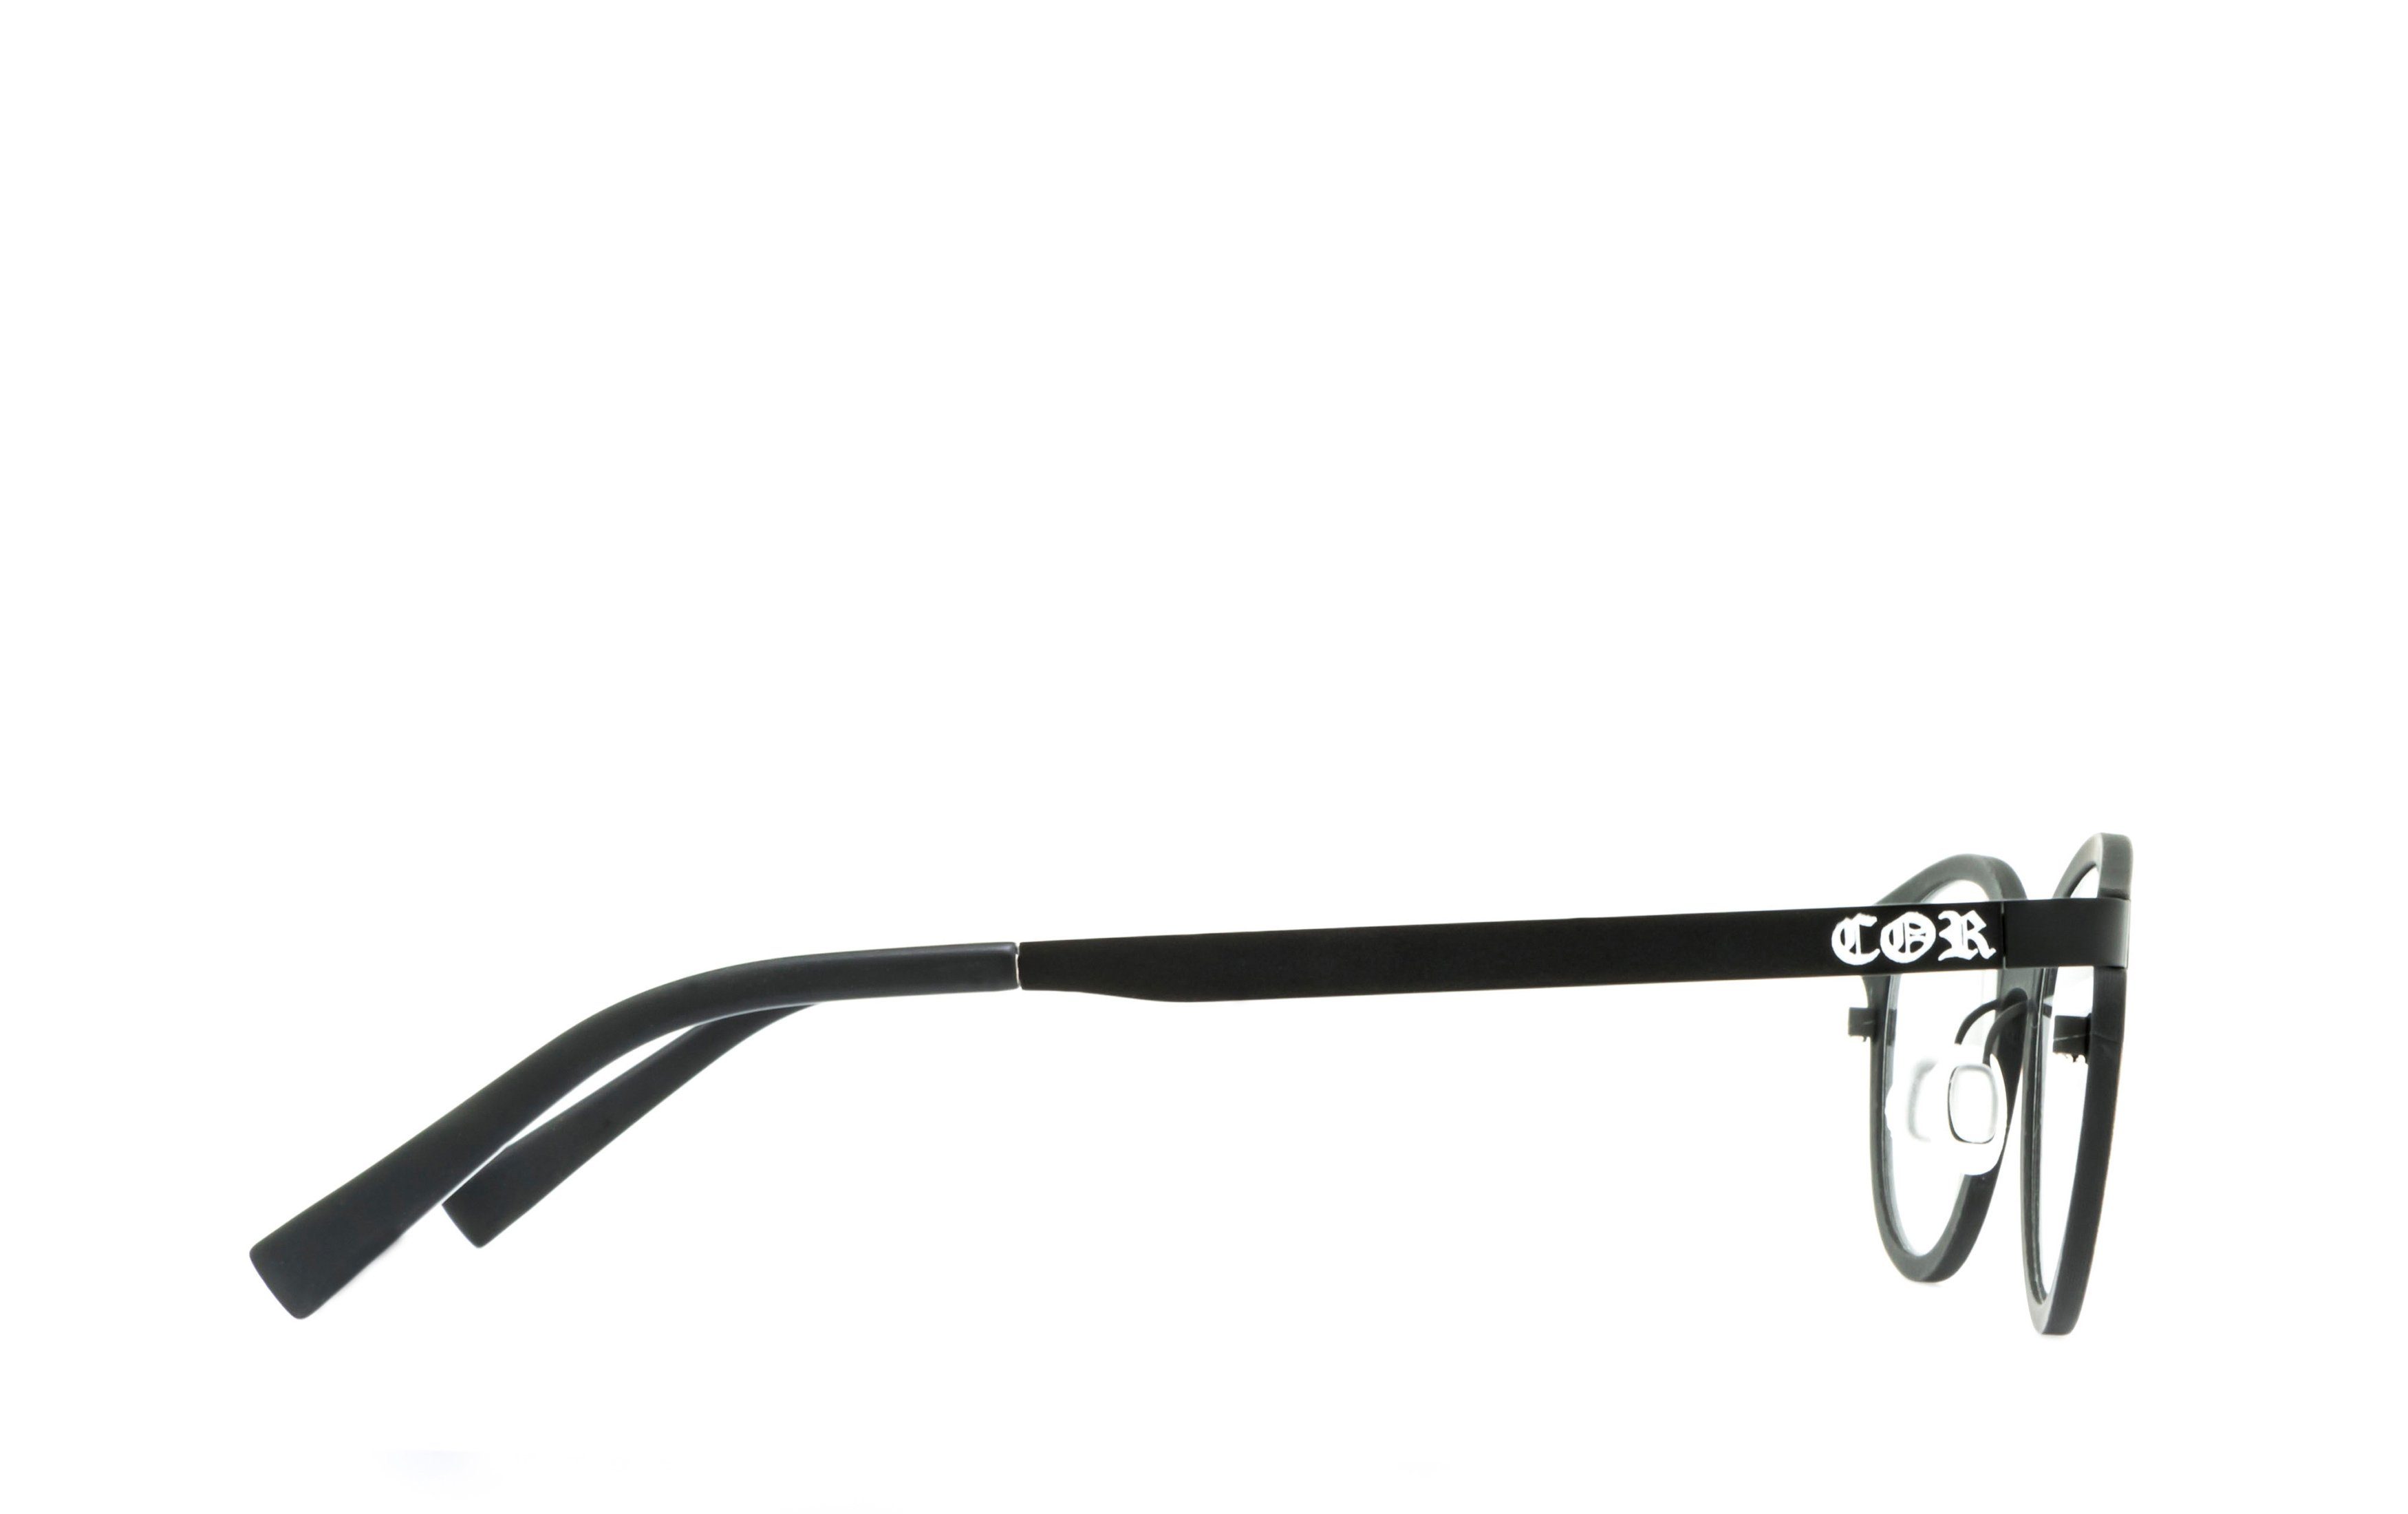 COR Carbon Brillengestell mit Brille COR069b, Holz-Look